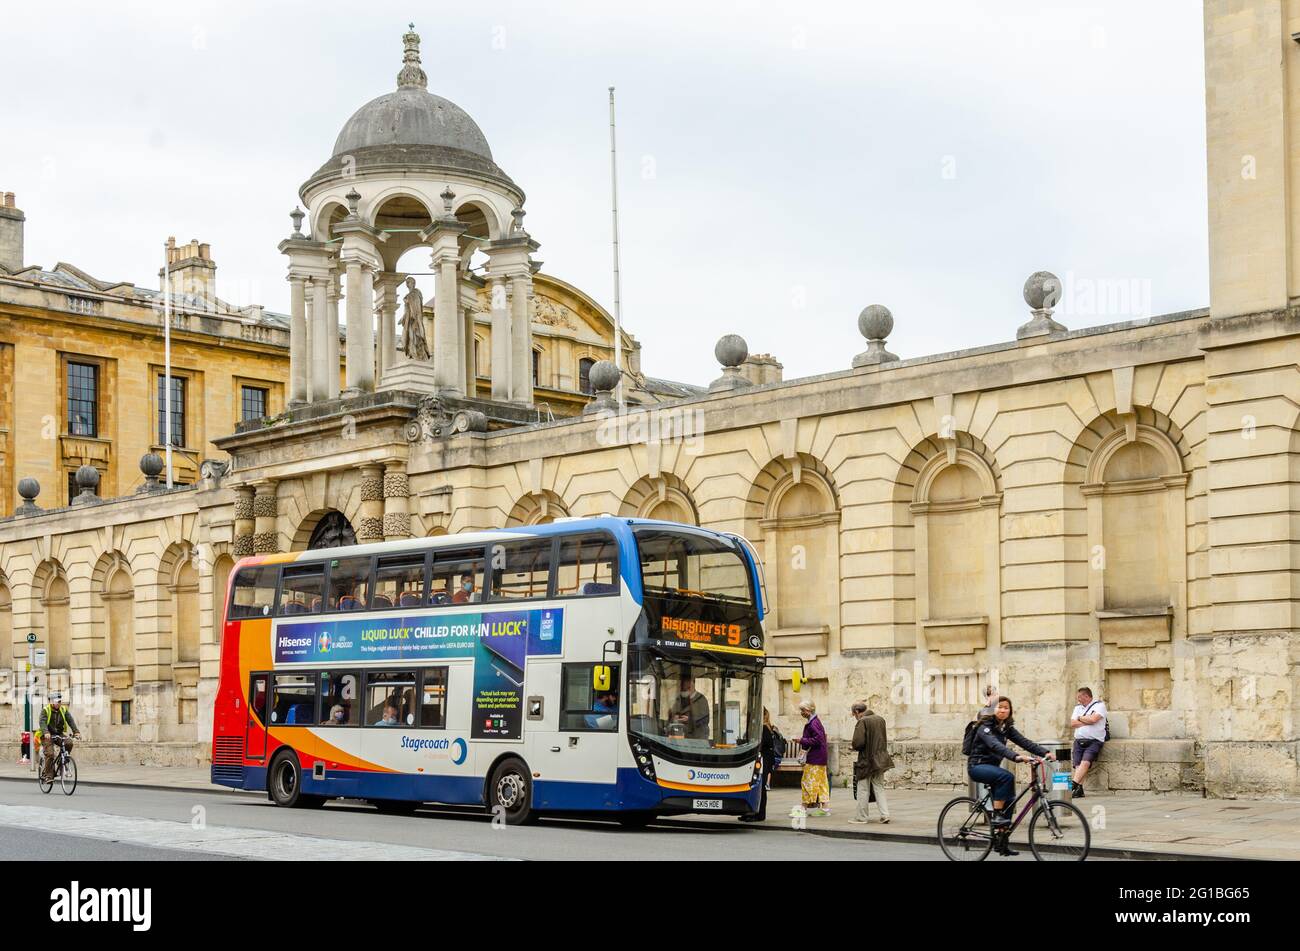 A bus stops outside University of Oxford, Queen's College on the High Street in Oxford, UK. Stock Photo